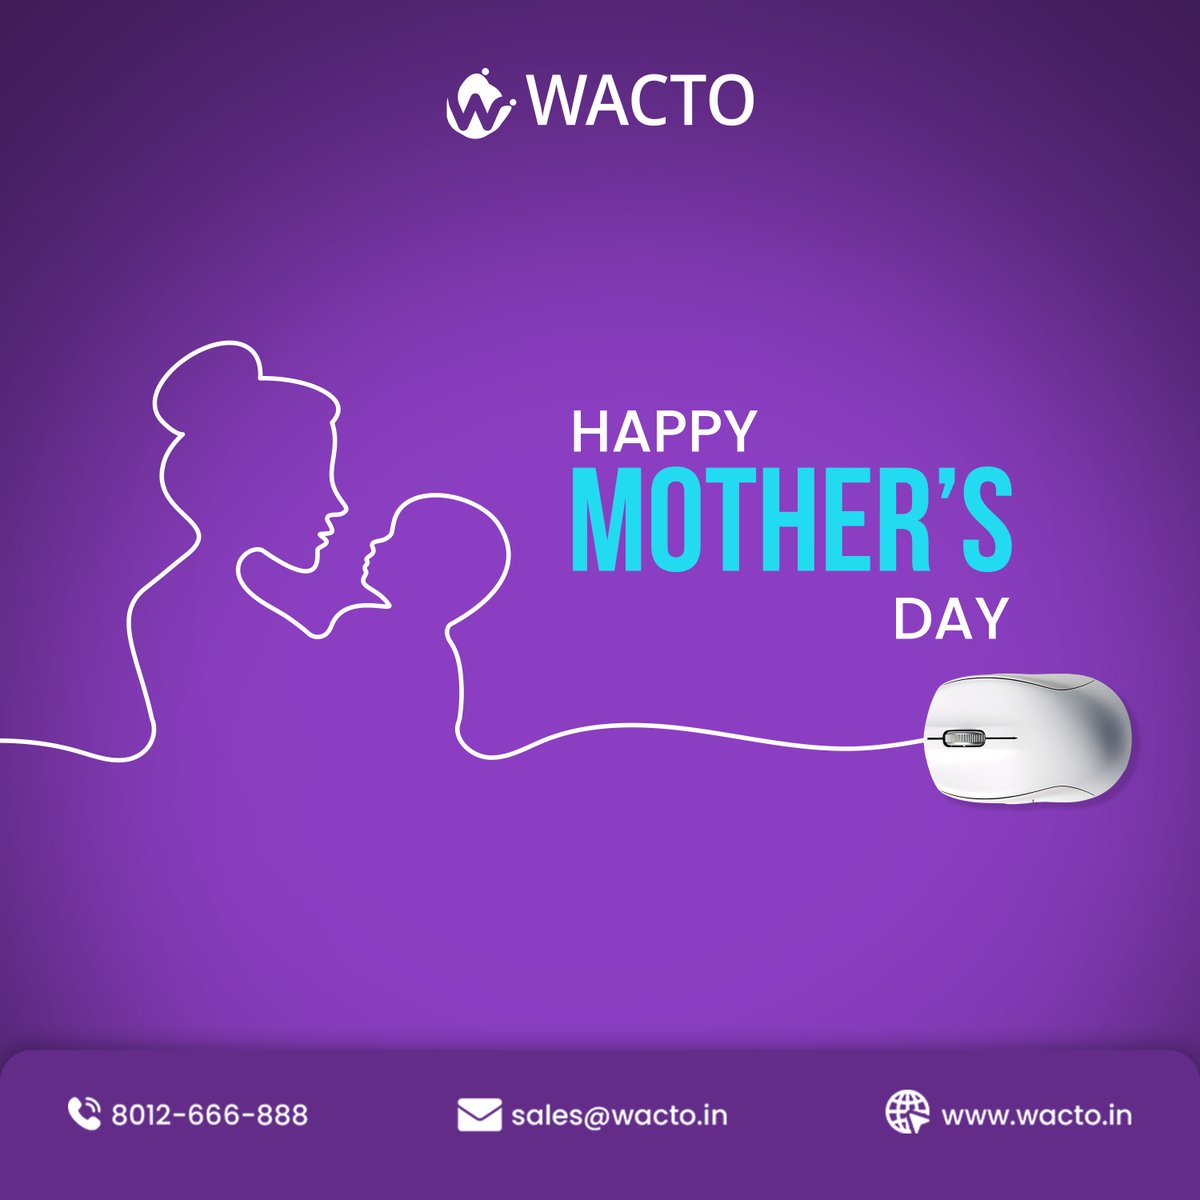 Here's to the original multitasker, the queen of hugs, and the maker of magic moments. Happy Mother's Day to all the incredible moms out there! 💐✨
#MomLife #MomMagic #MothersDay #WACTO #BusinessAutomation #Omnichannel #BusinessGrowth #Chatbot #AI #AIChatbot